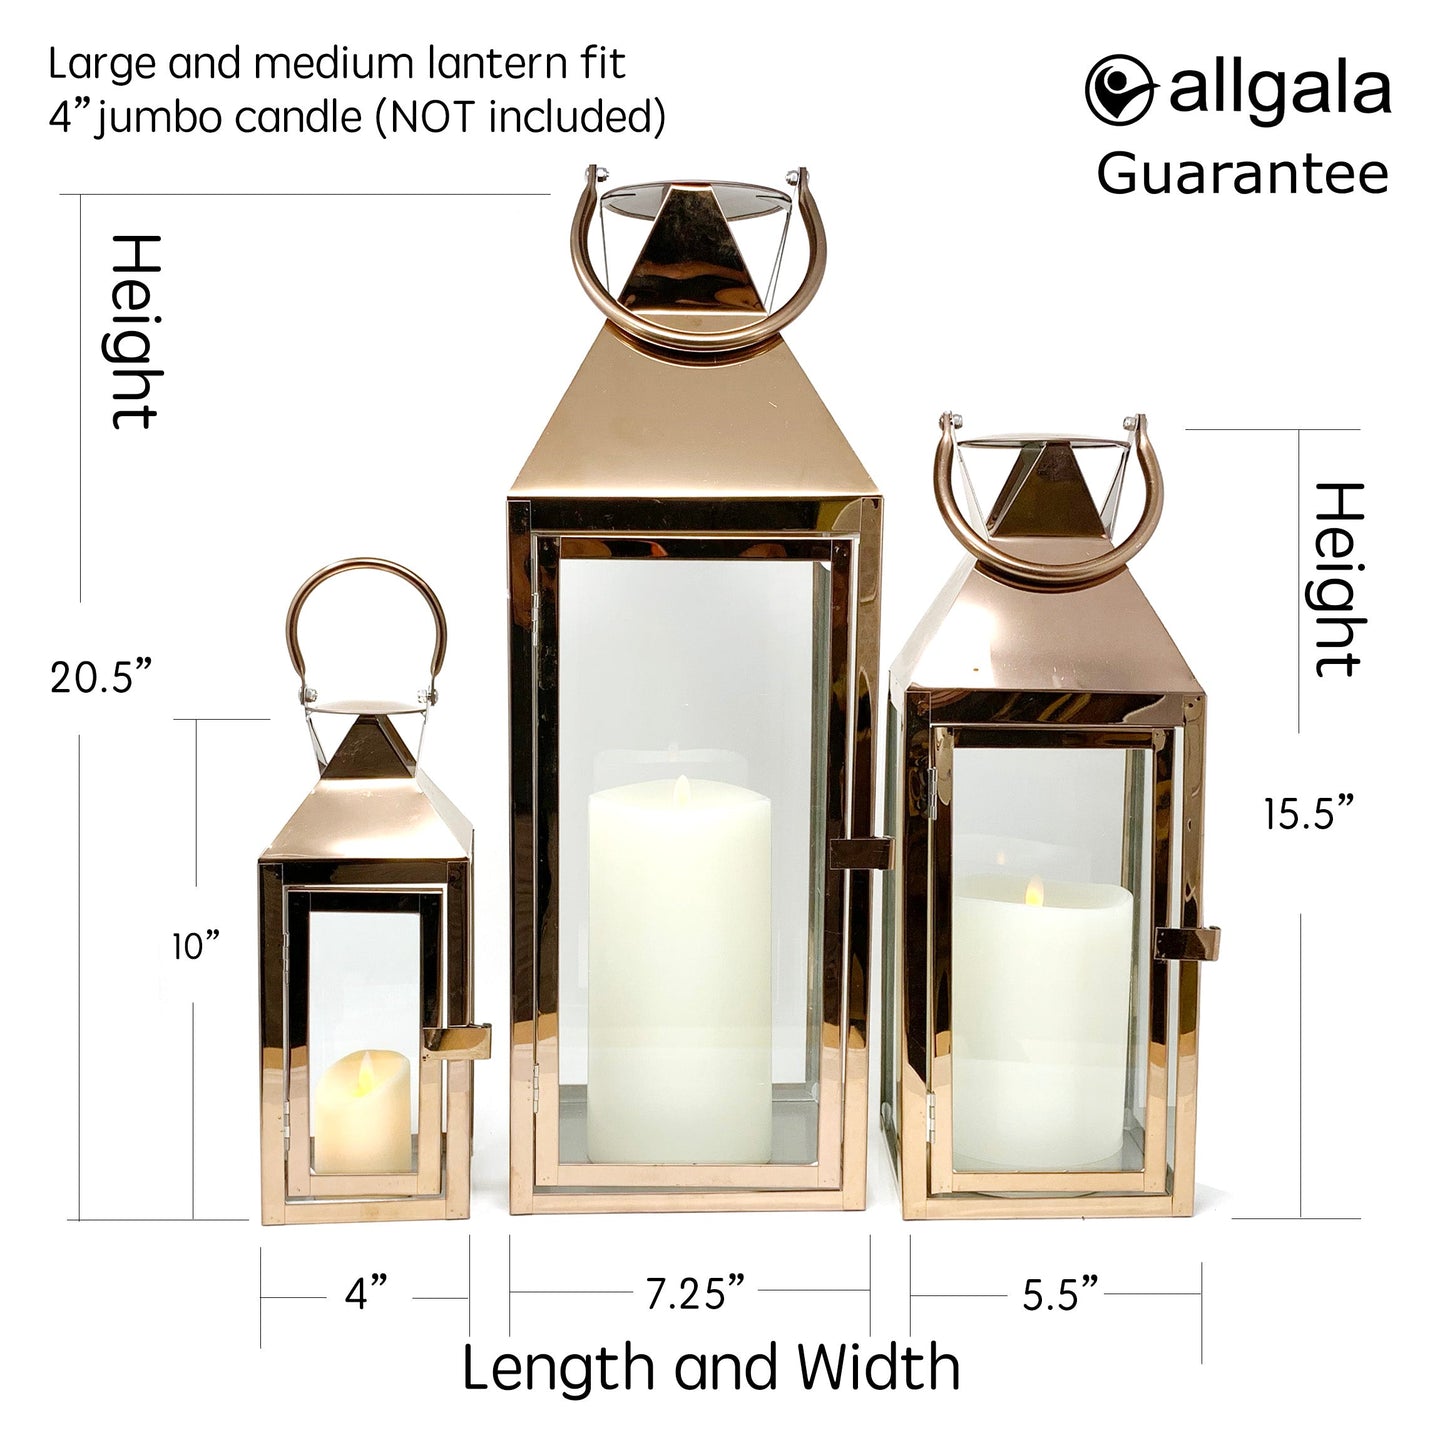 Allgala Lanterns 8 SET 3-PC Set Jumbo Indoor/Outdoor Hurricane Candle Lantern Set with Chrome Plated Structure and Tempered Glass-Pyramid Top